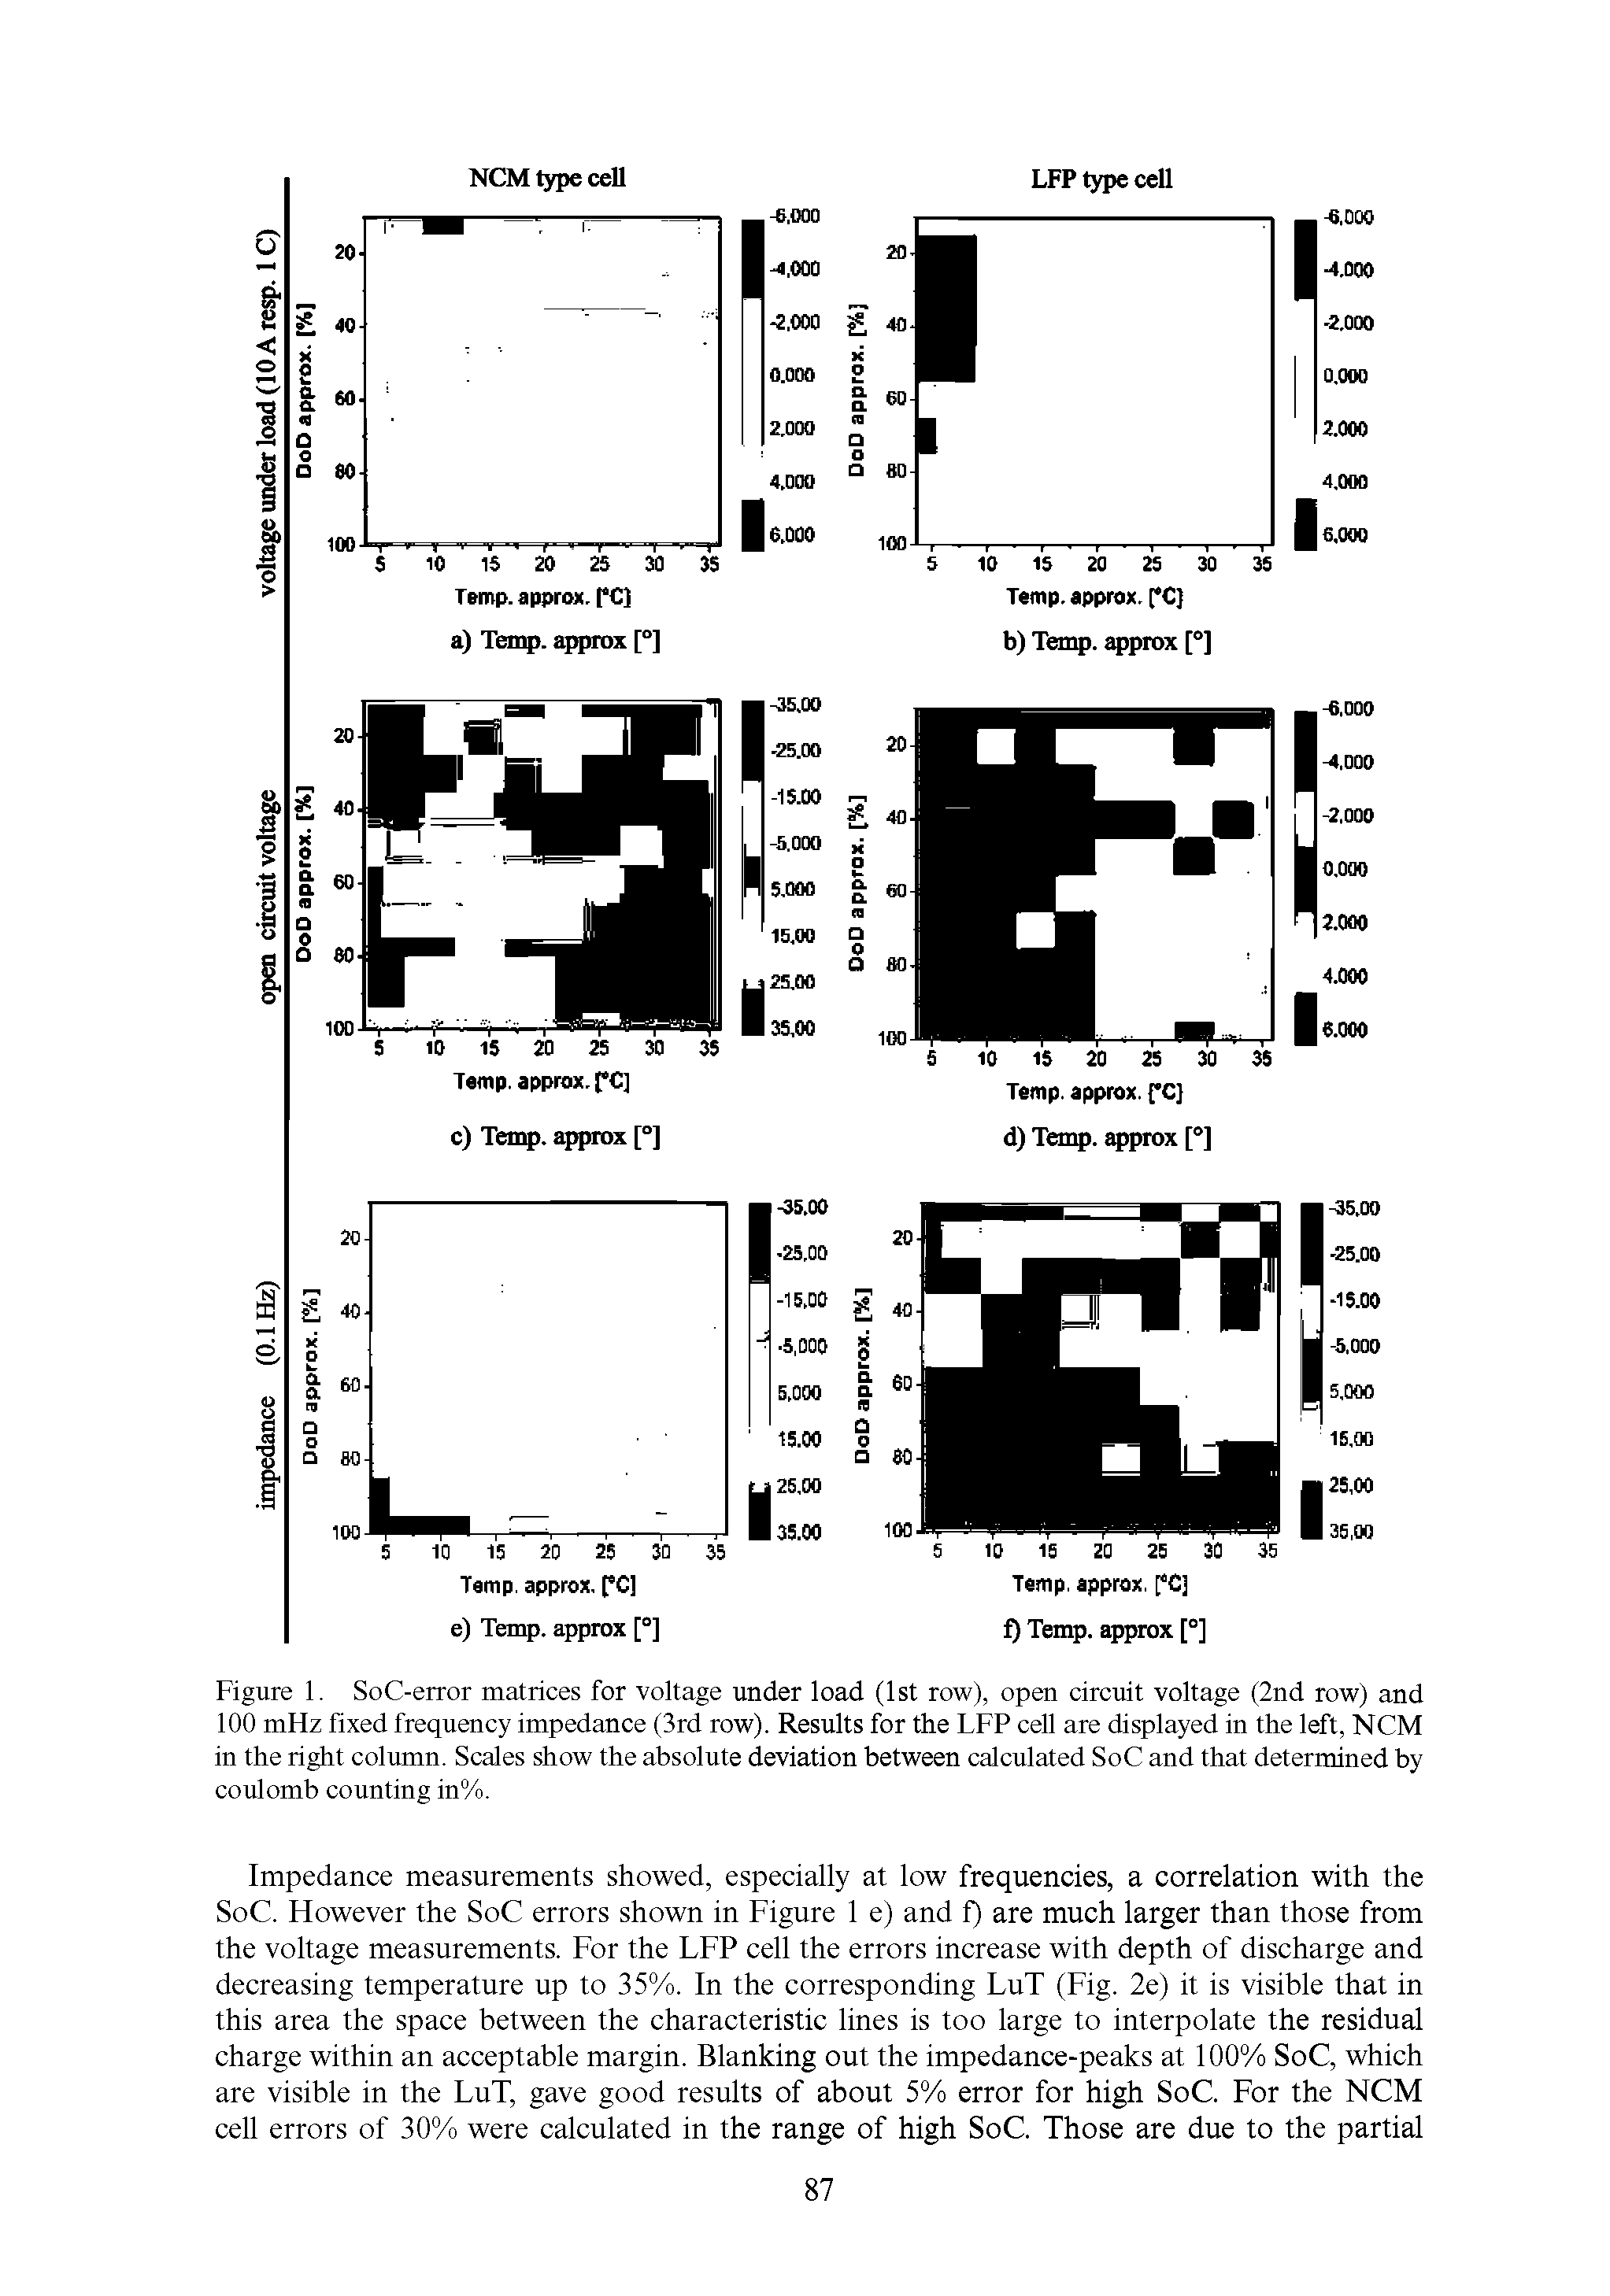 Figure 1. SoC-error matrices for voltage under load (1st row), open circuit voltage (2nd row) and 100 mHz fixed frequency impedance (3rd row). Results for the LFP cell are displayed in the left, NCM in the right column. Scales show the absolute deviation between calculated SoC and that determined by...